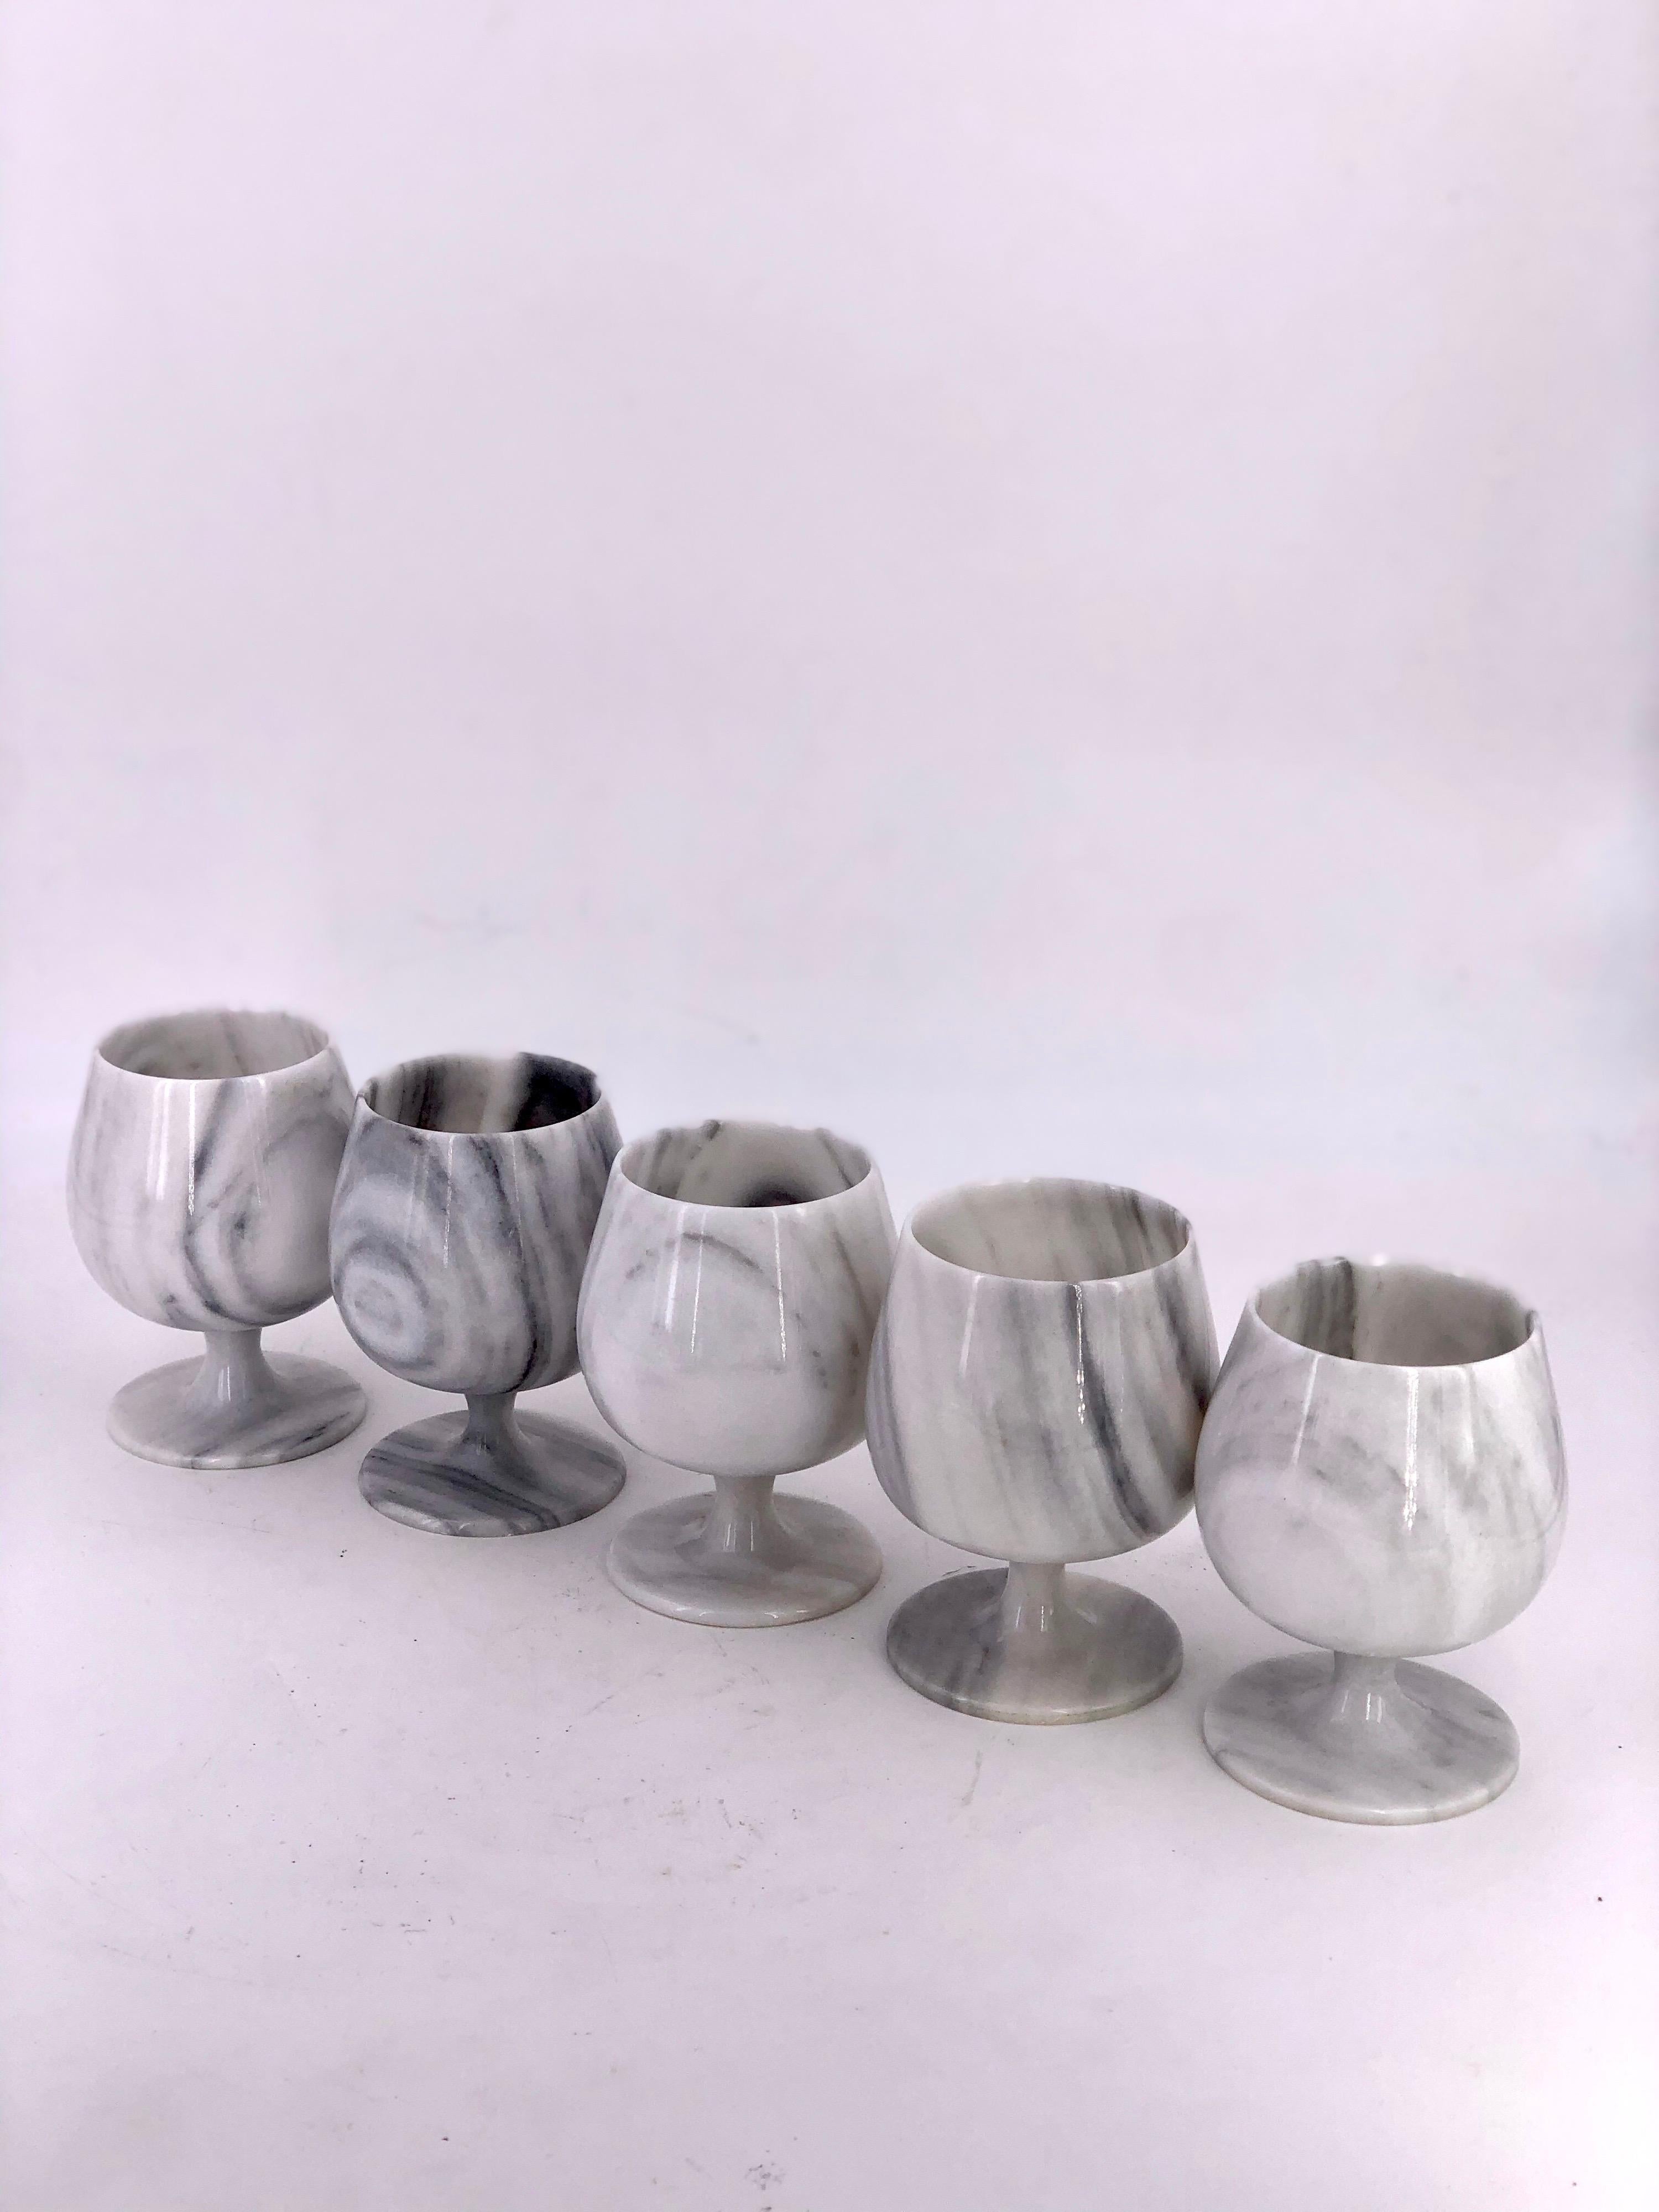 A great set of solid marble footed goblets these are beautiful no chips or cracks, great design thin marble delicate one piece.